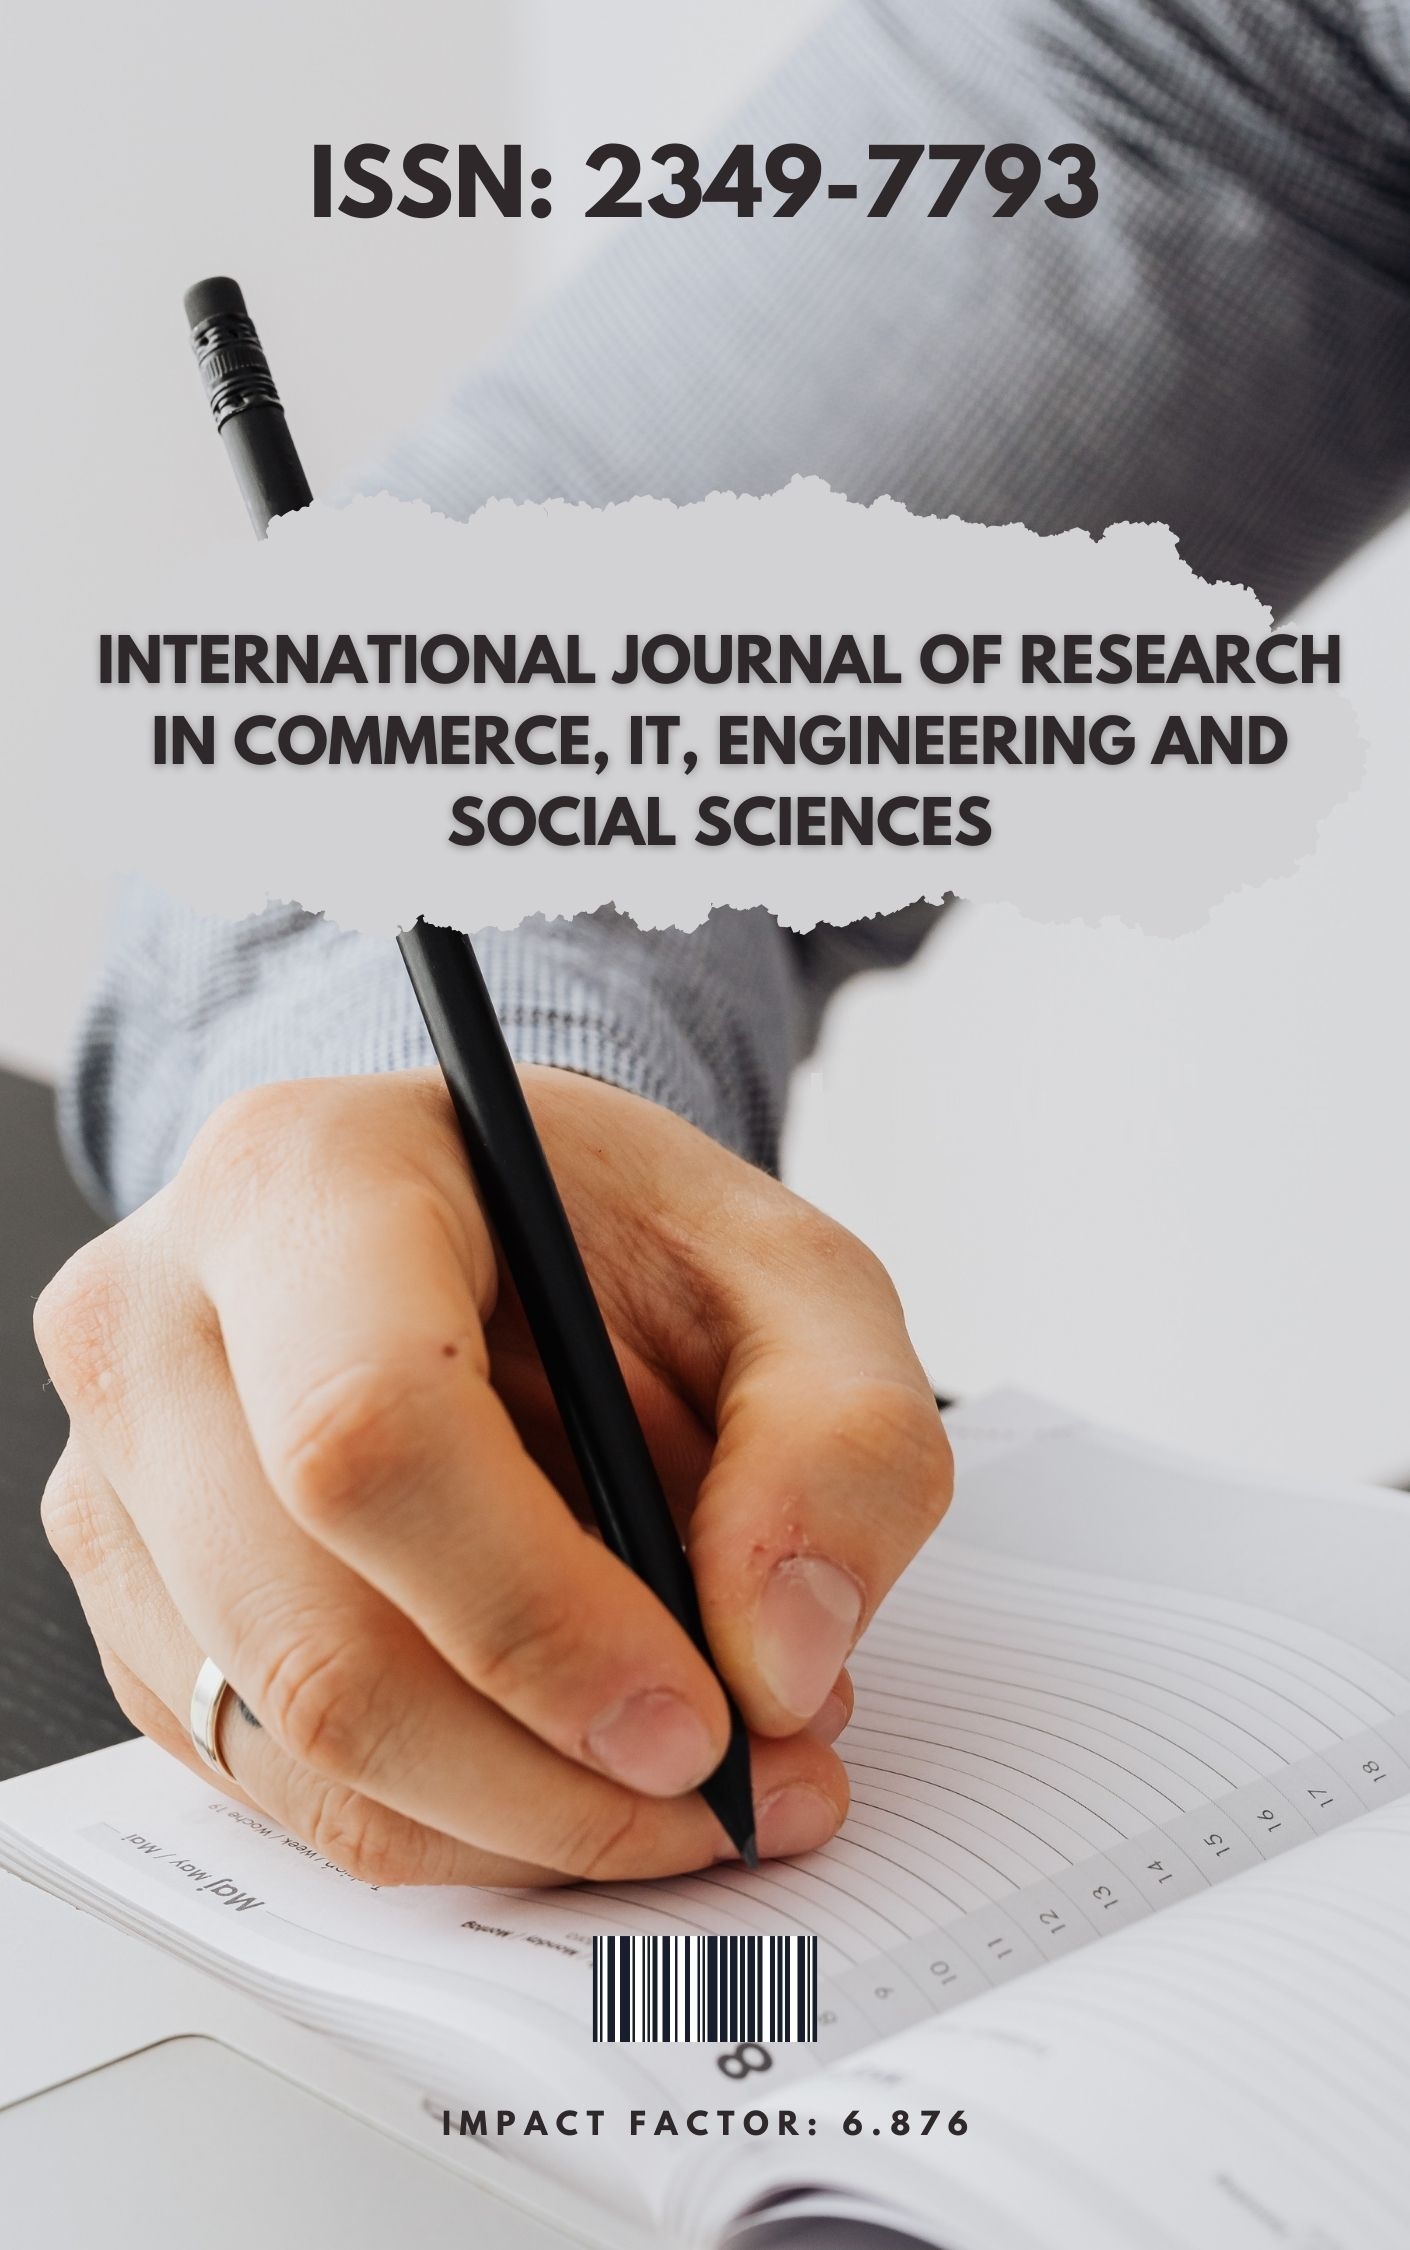 					View Vol. 15 No. 8 (2021): International Journal of Research in Commerce, IT, Engineering, and Social Sciences
				